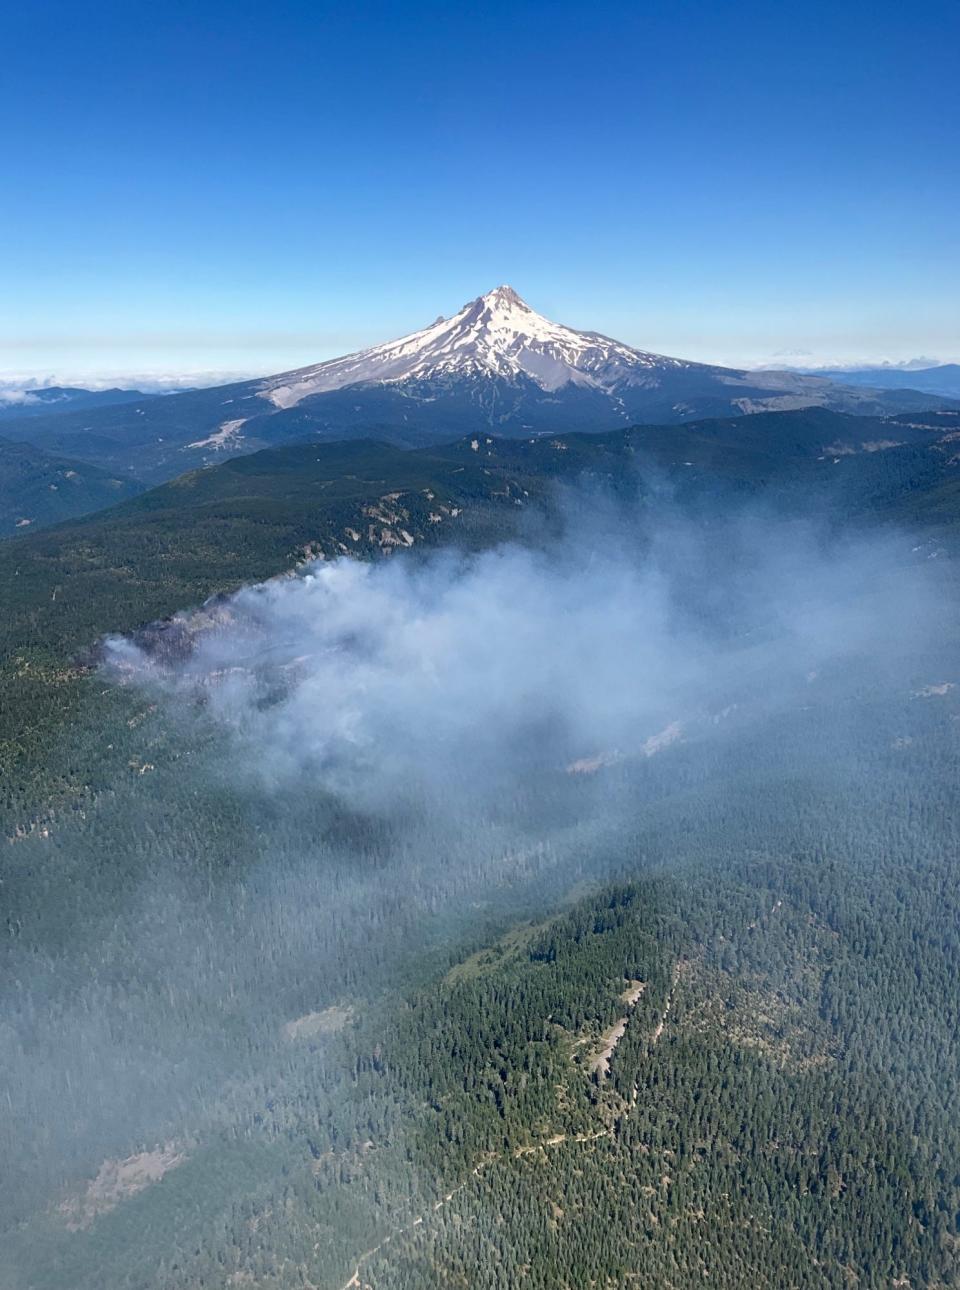 Southeast of Mount Hood, the Boulder Fire grew to 237 acres Tuesday.